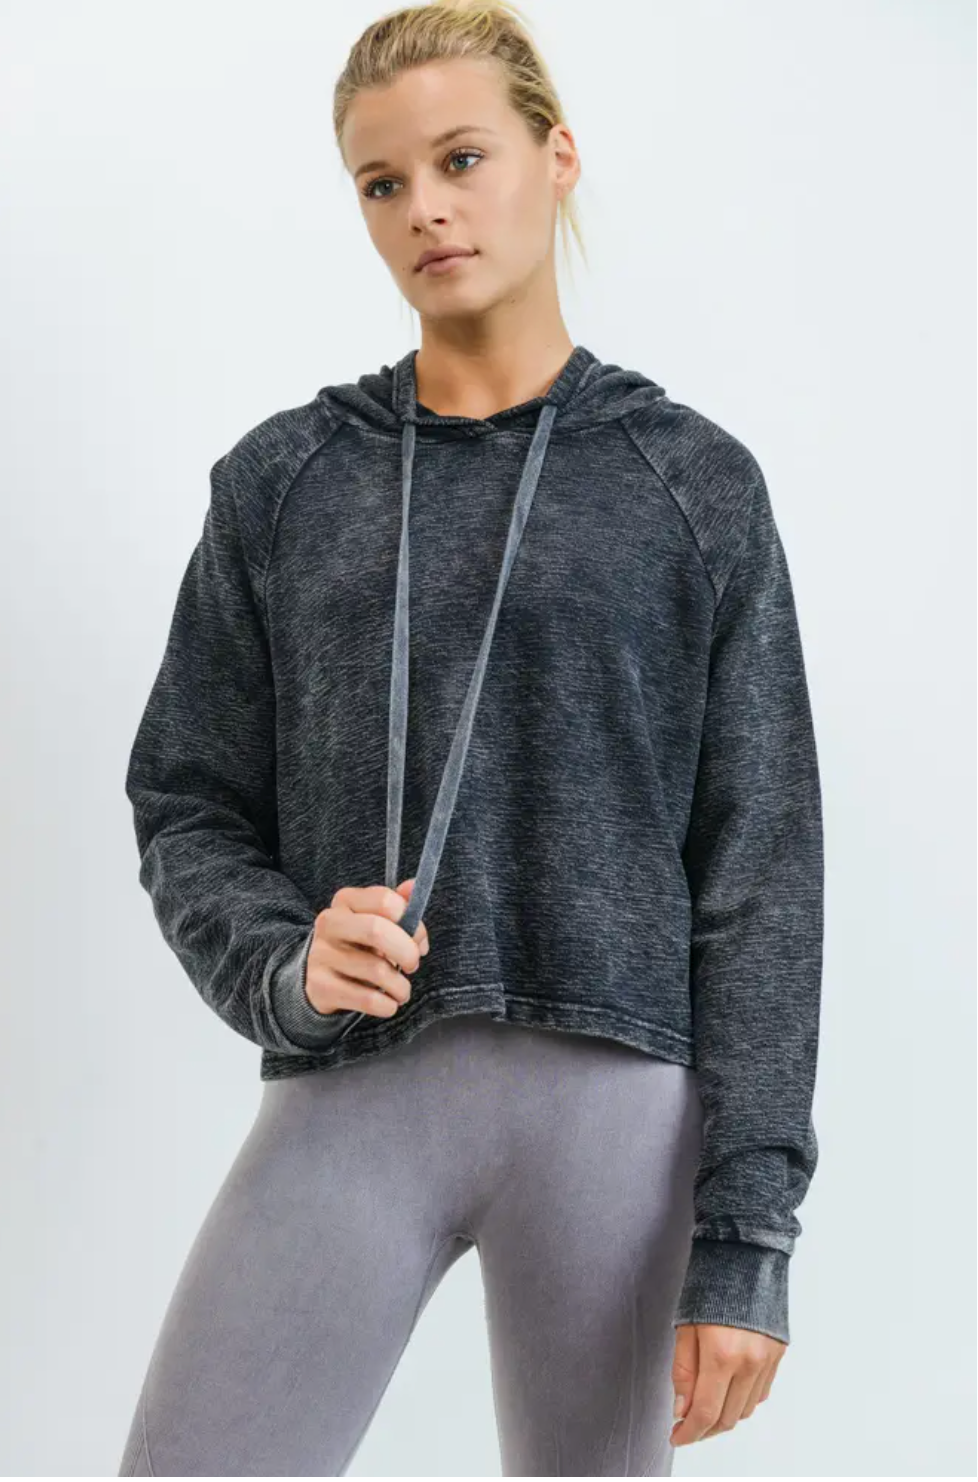 Mineral Wash Jacquard Hoodie Pullover